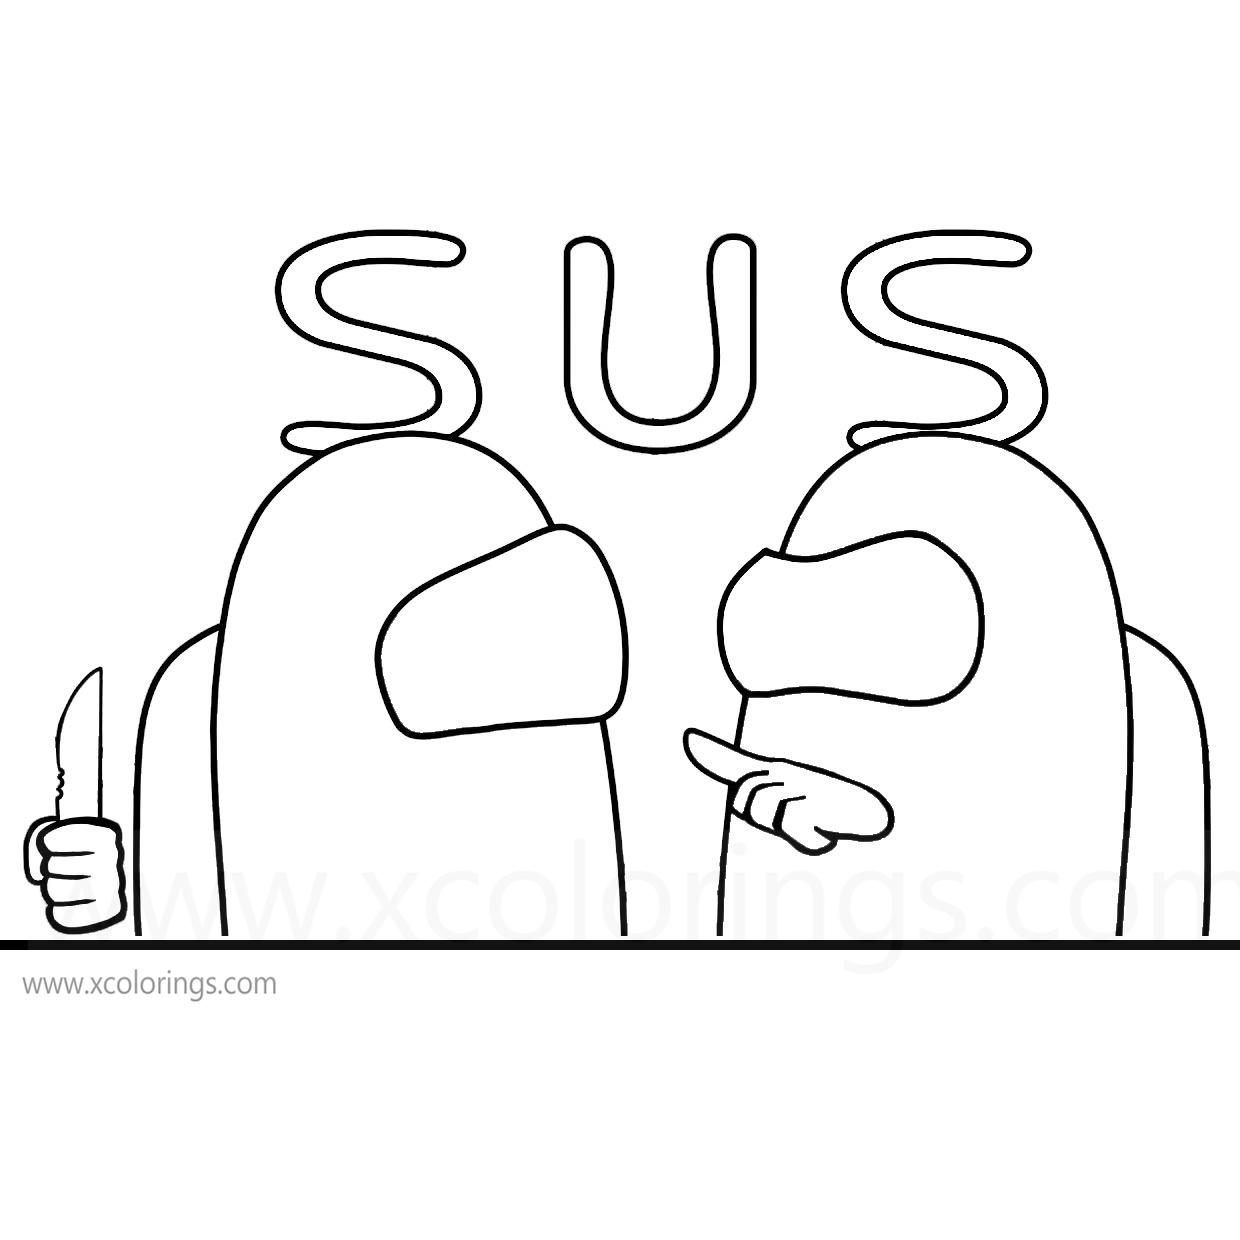 Free Among Us Coloring Pages SUS Impostor printable